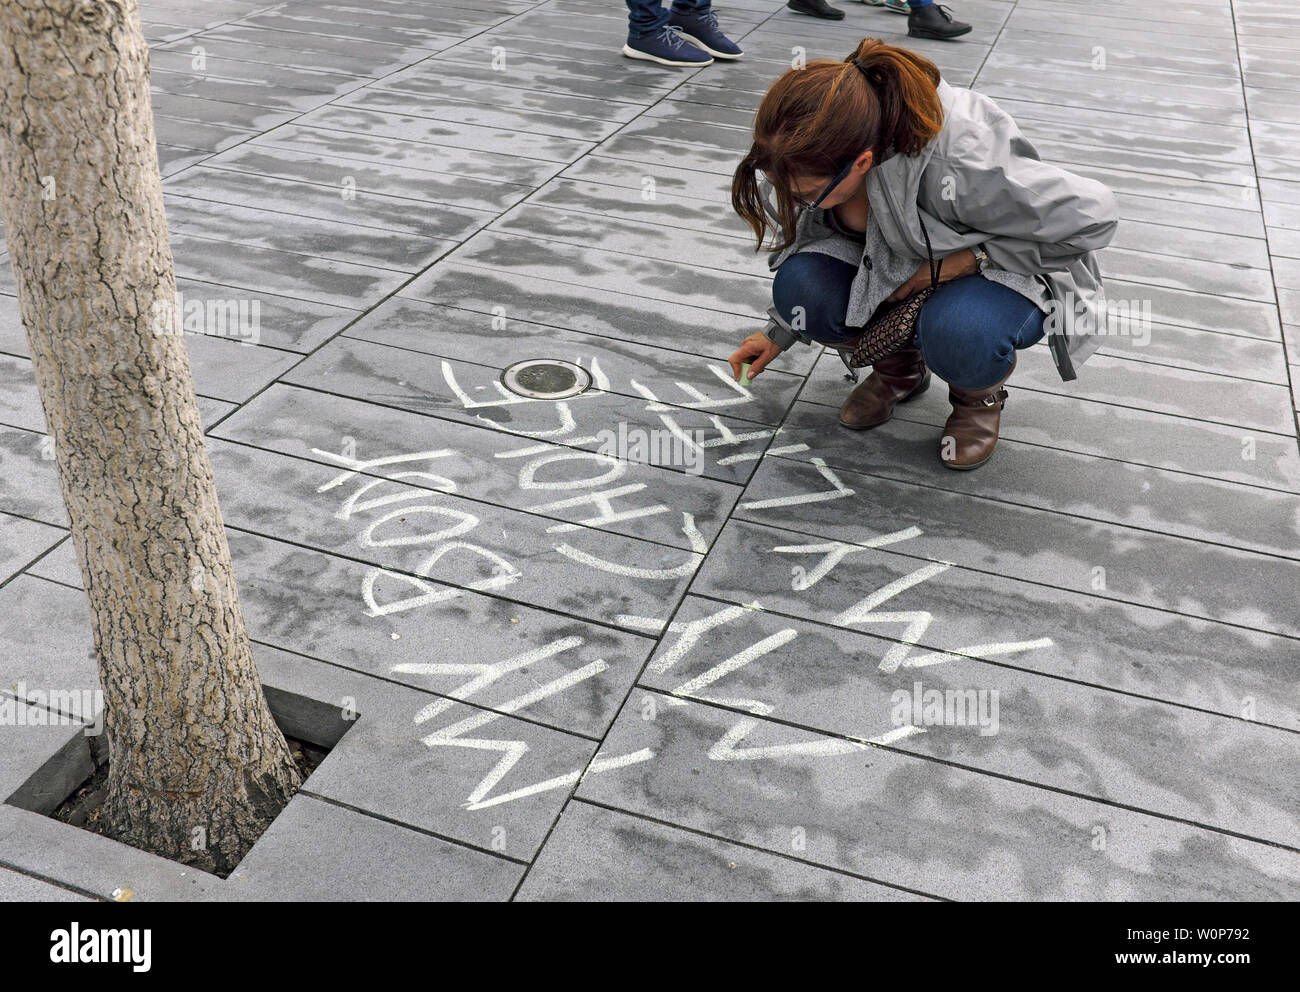 'My Body, My Choice, My Life' is chalked by a woman participating in a 2019 Women's Rights rally in Cleveland, Ohio, USA. Stock Photo